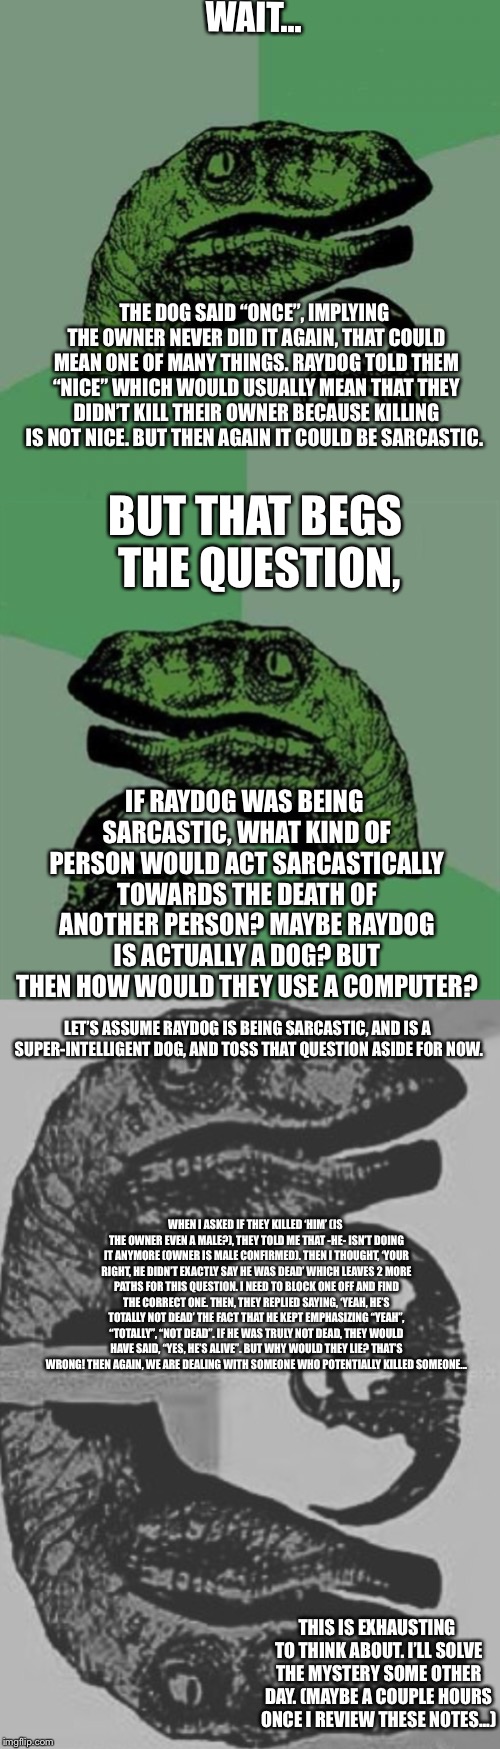 WAIT... THE DOG SAID “ONCE”, IMPLYING THE OWNER NEVER DID IT AGAIN, THAT COULD MEAN ONE OF MANY THINGS. RAYDOG TOLD THEM “NICE” WHICH WOULD  | image tagged in memes,philosoraptor | made w/ Imgflip meme maker